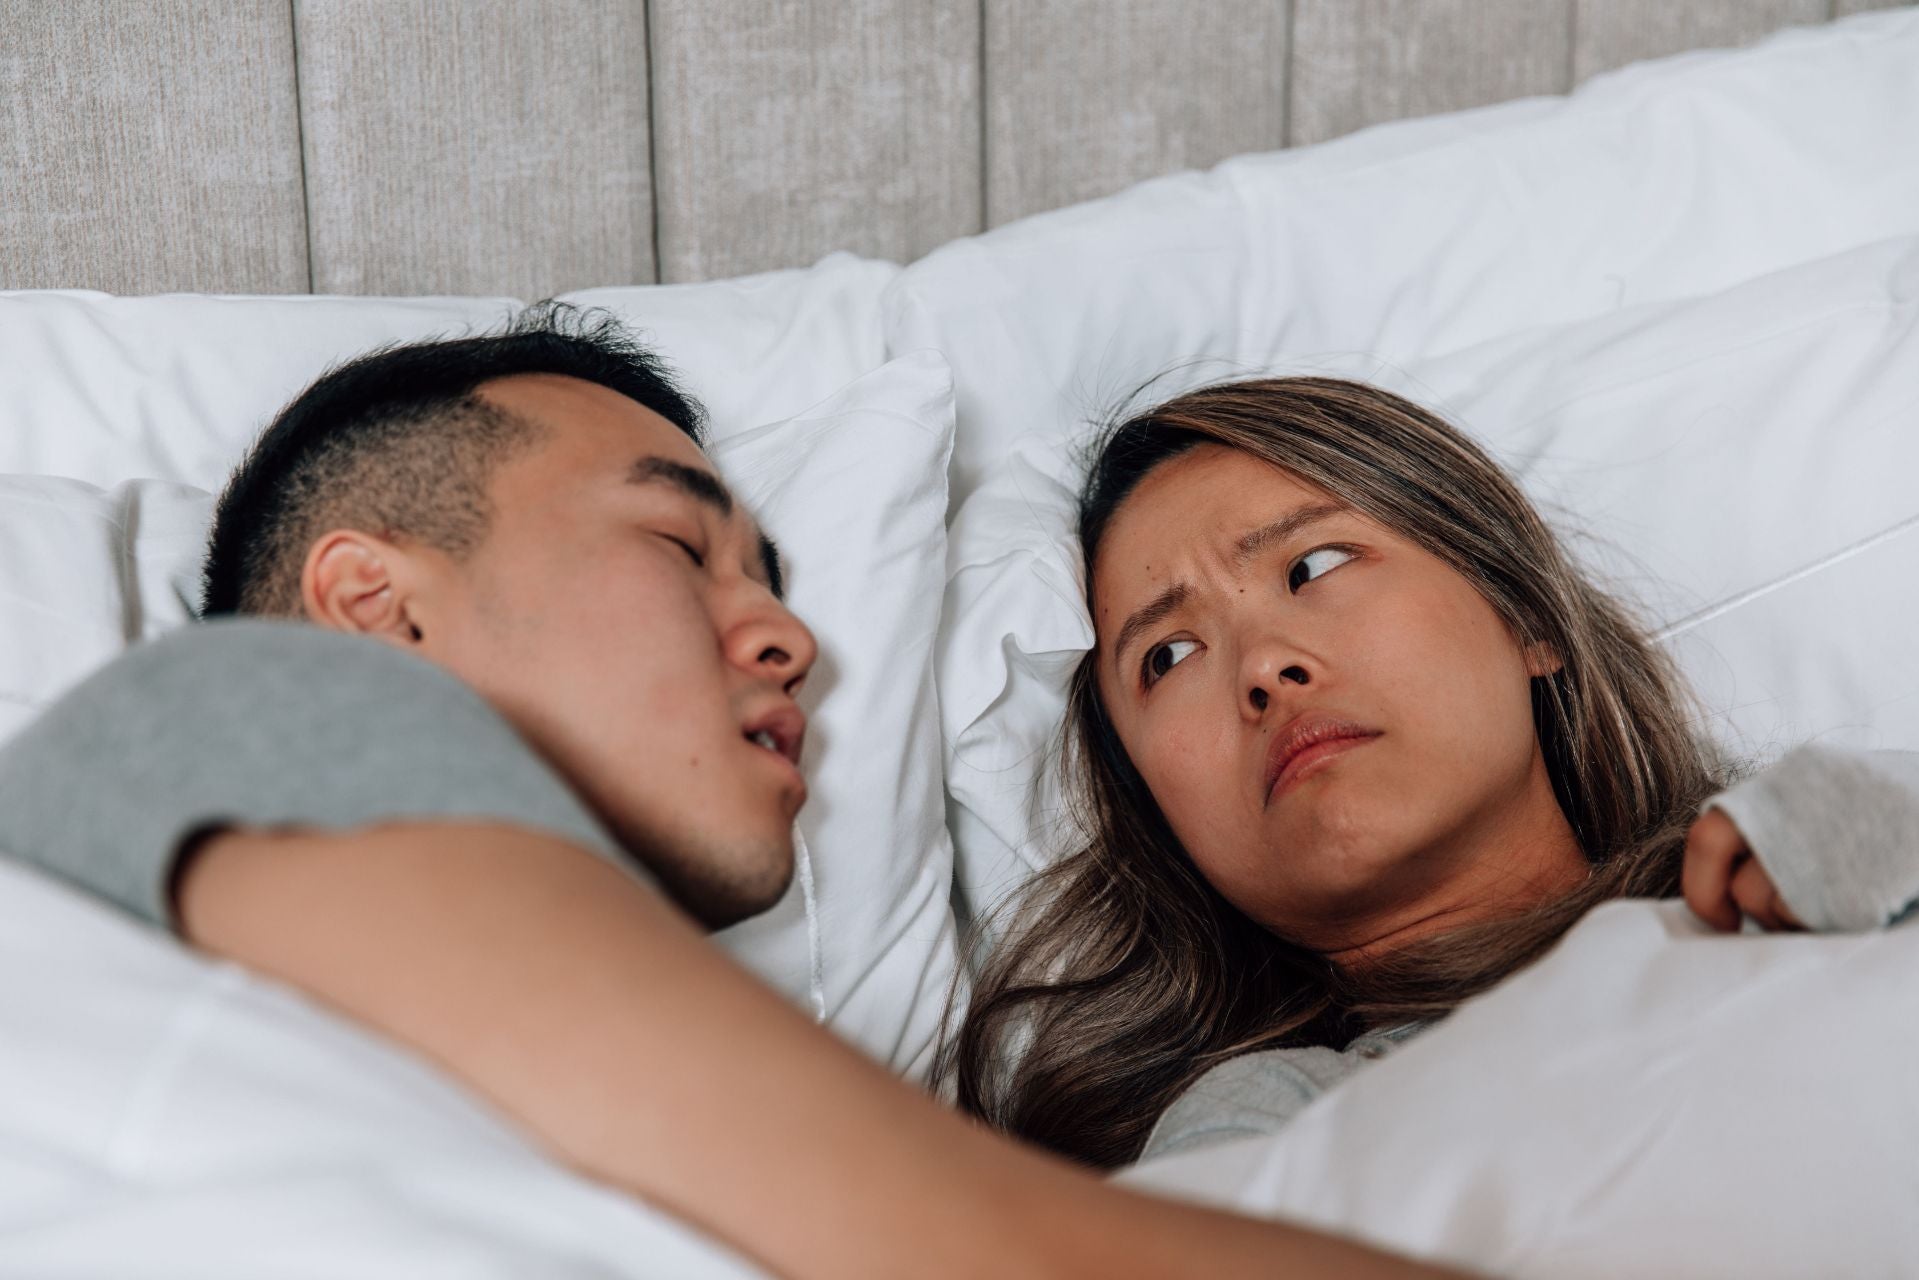 Snoring Husband? How to Stop the Snoring For Good